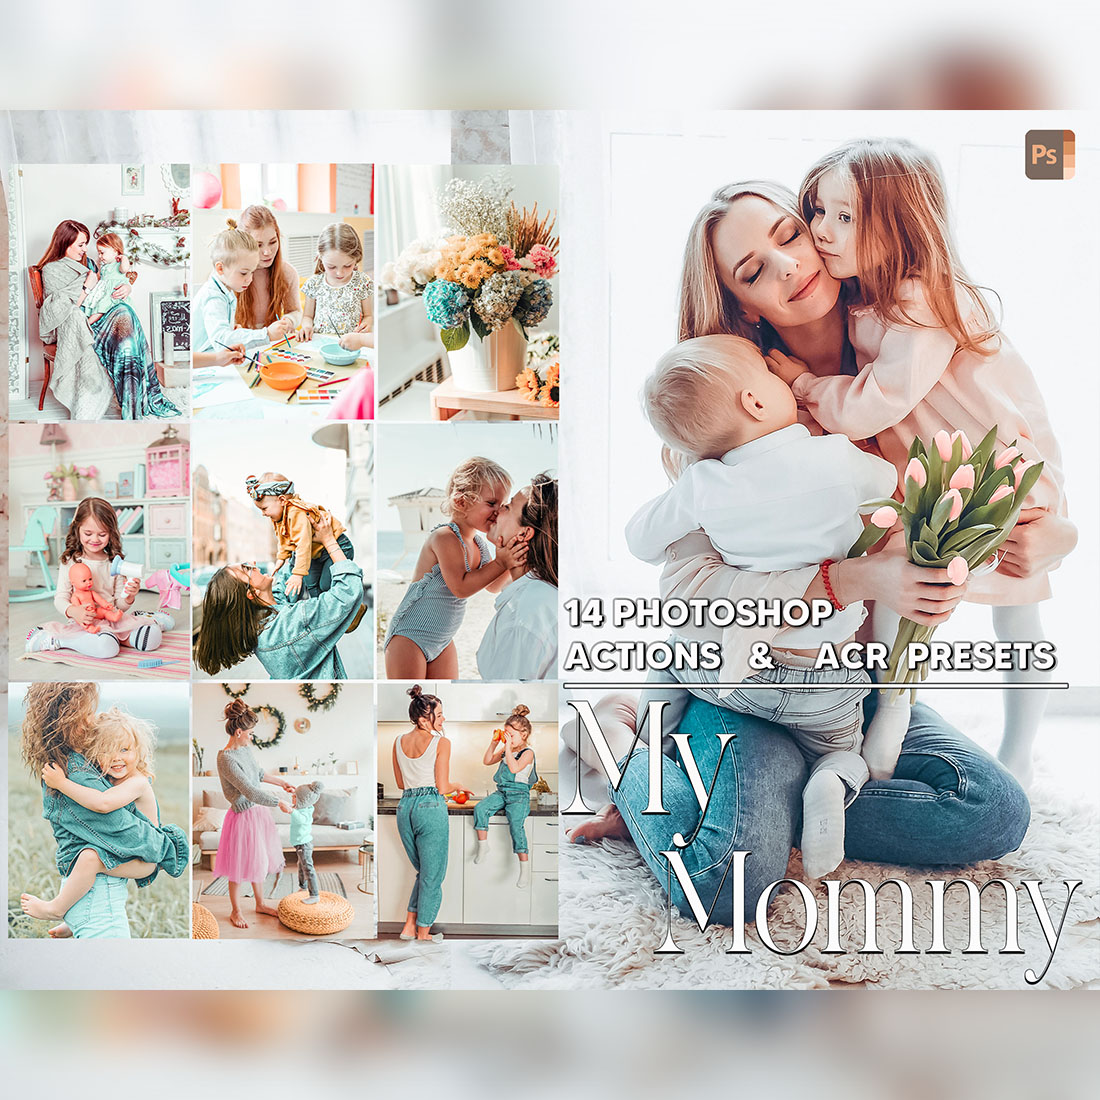 14 Photoshop Actions, My Mommy Ps Action, Light ACR Preset, Pastel Ps Filter, Atn Pictures And style Theme For Instagram, Blogger cover image.